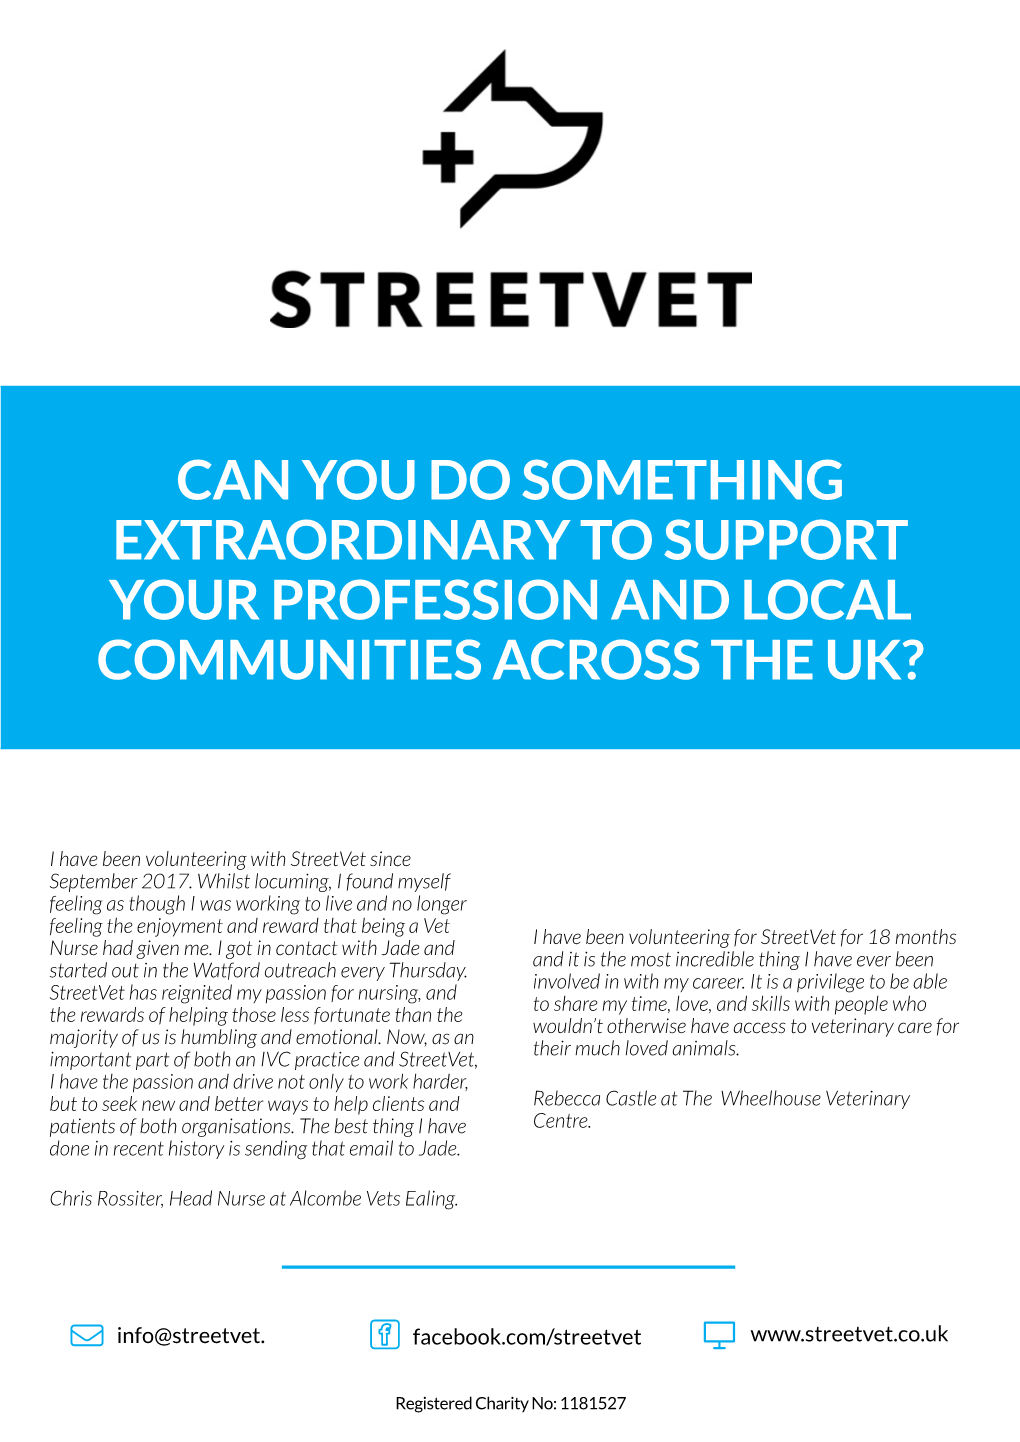 Can You Do Something Extraordinary to Support Your Profession and Local Communities Across the Uk?